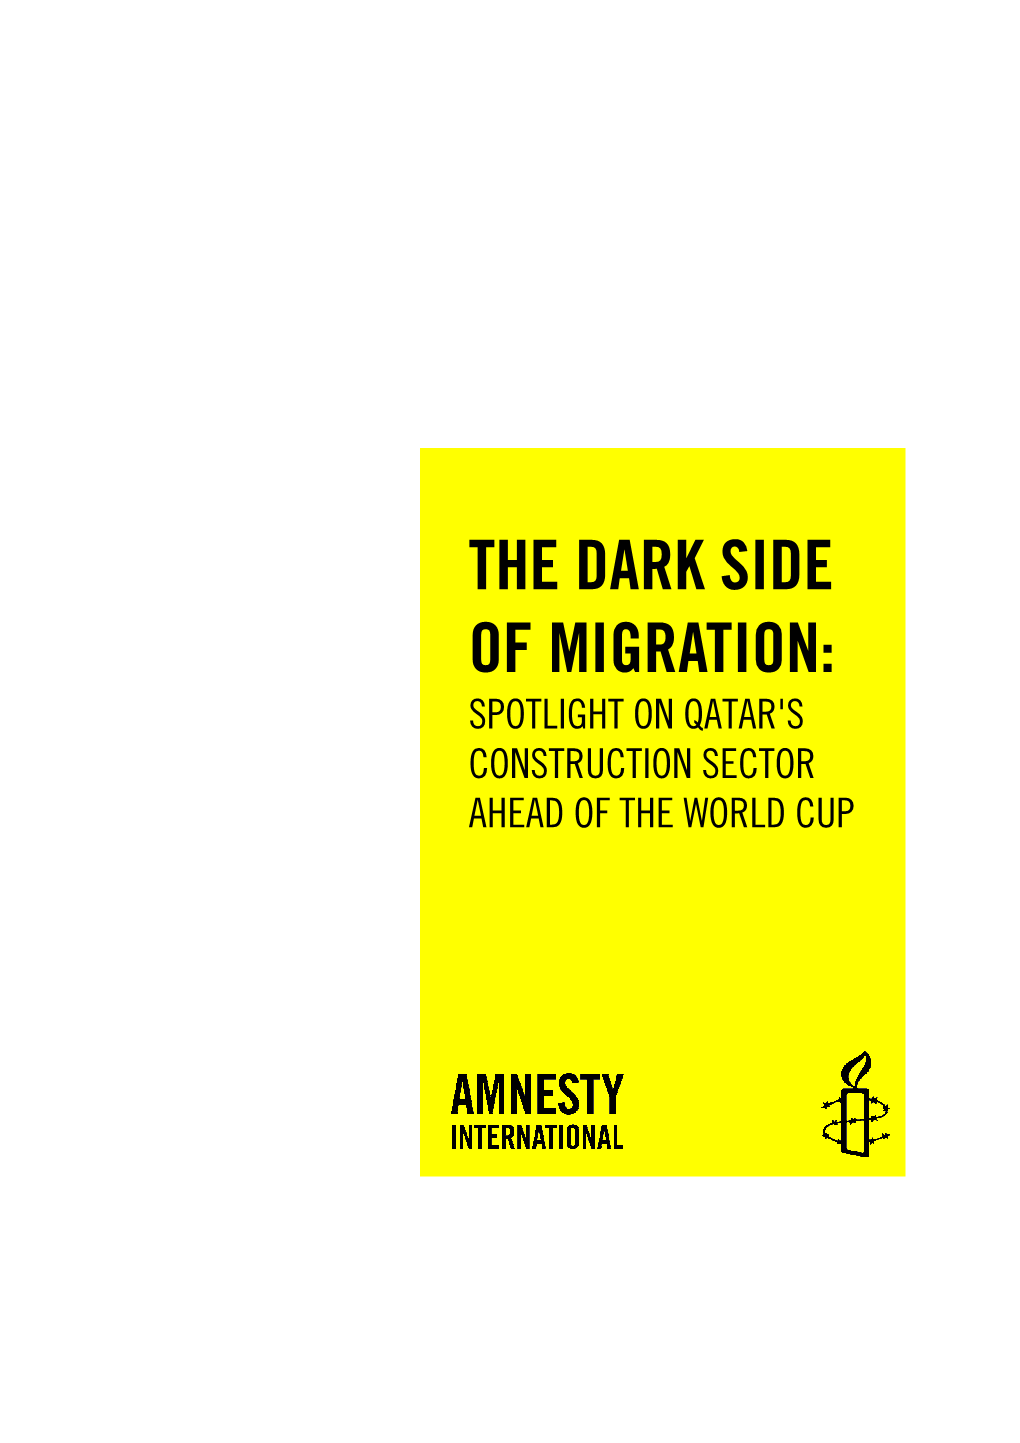 The Dark Side of Migration: Spotlight on Qatar's Construction Sector Ahead of the World Cup